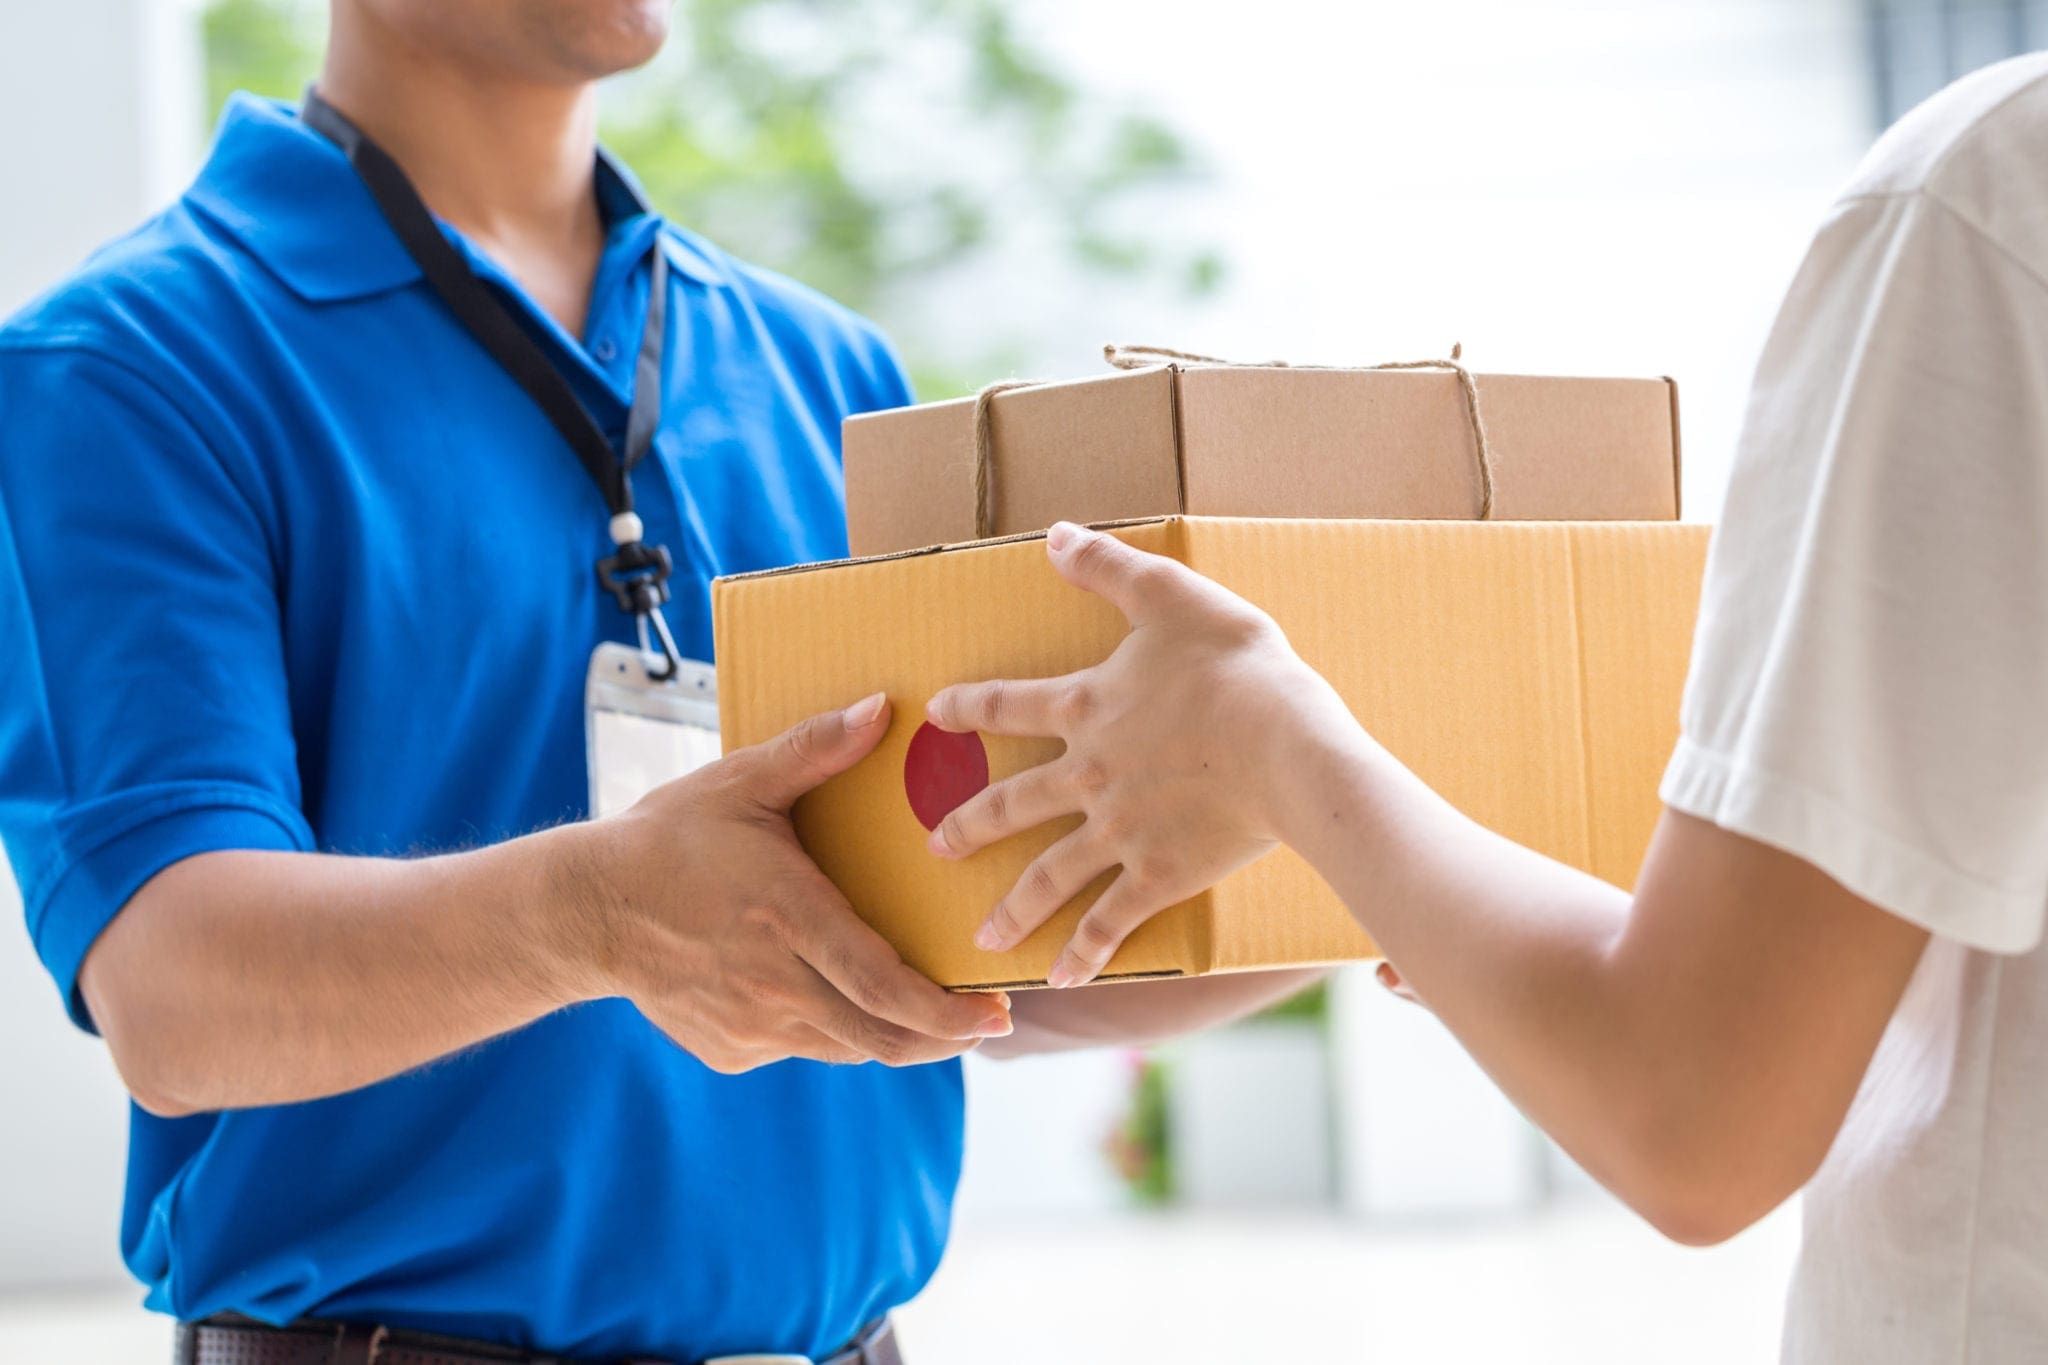 How Well Does Your Supply Chain Handle Returned Products? 